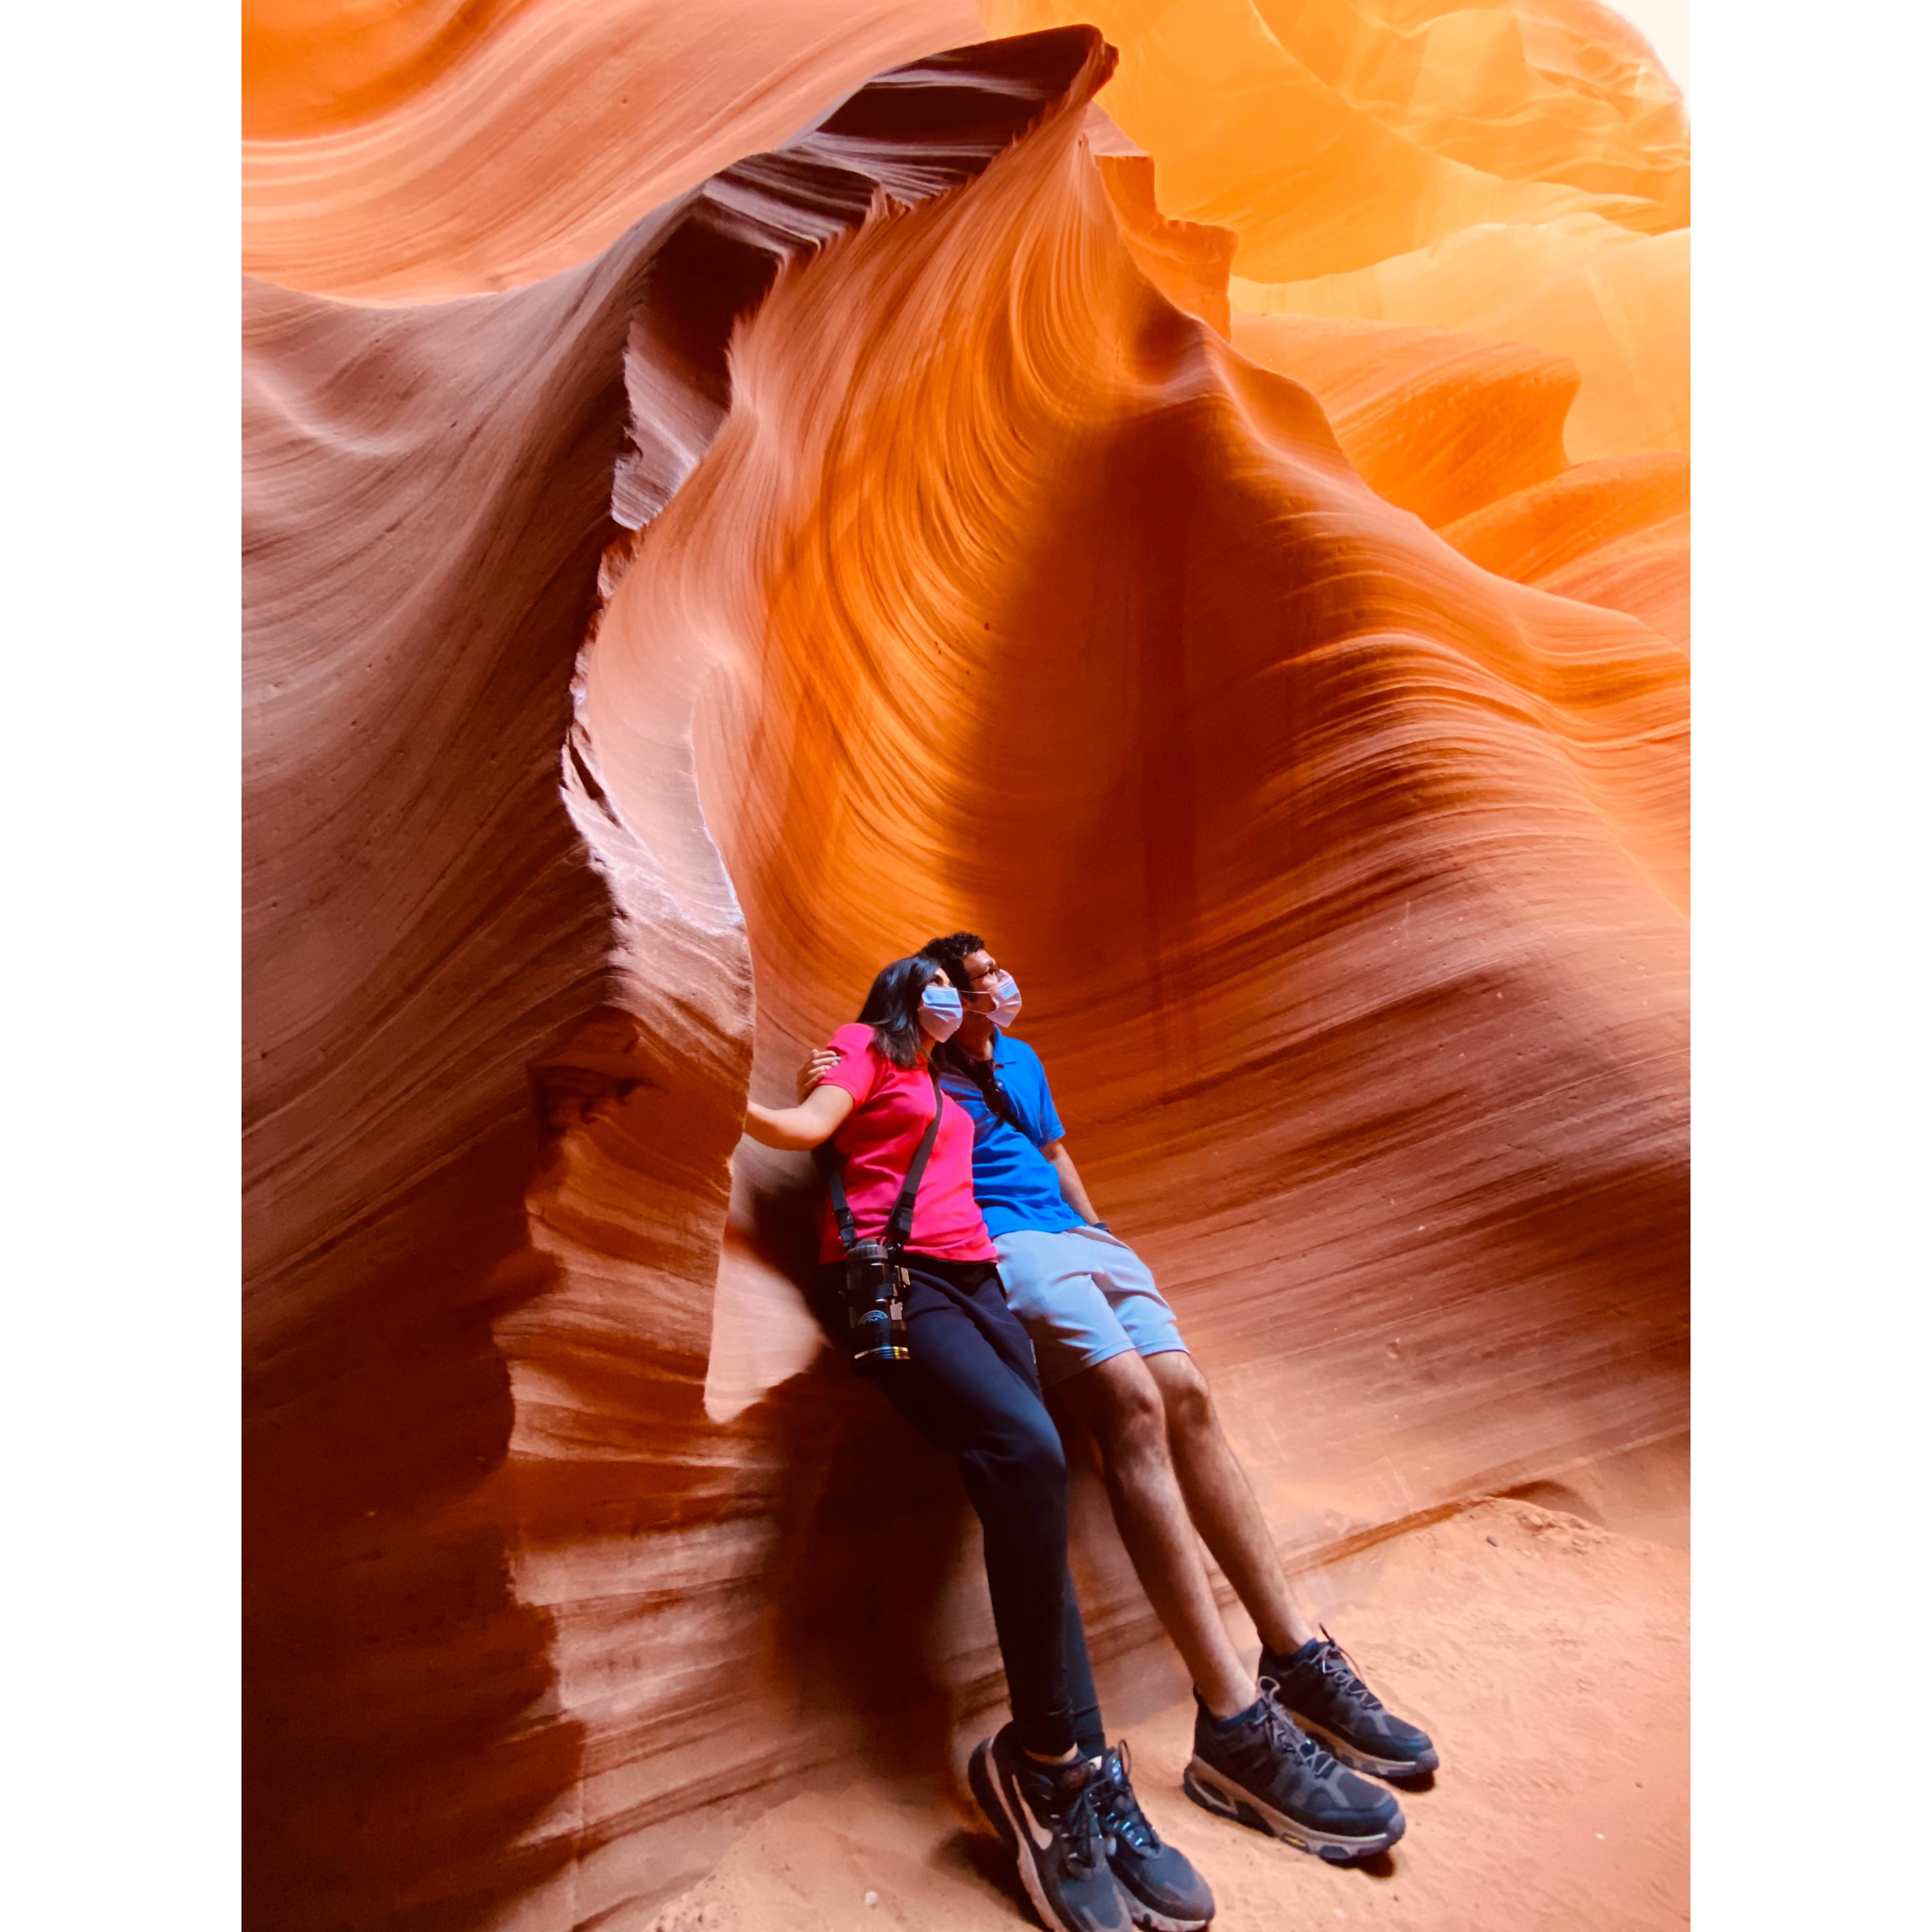 Inside Antelope Canyon, "masks required" :/